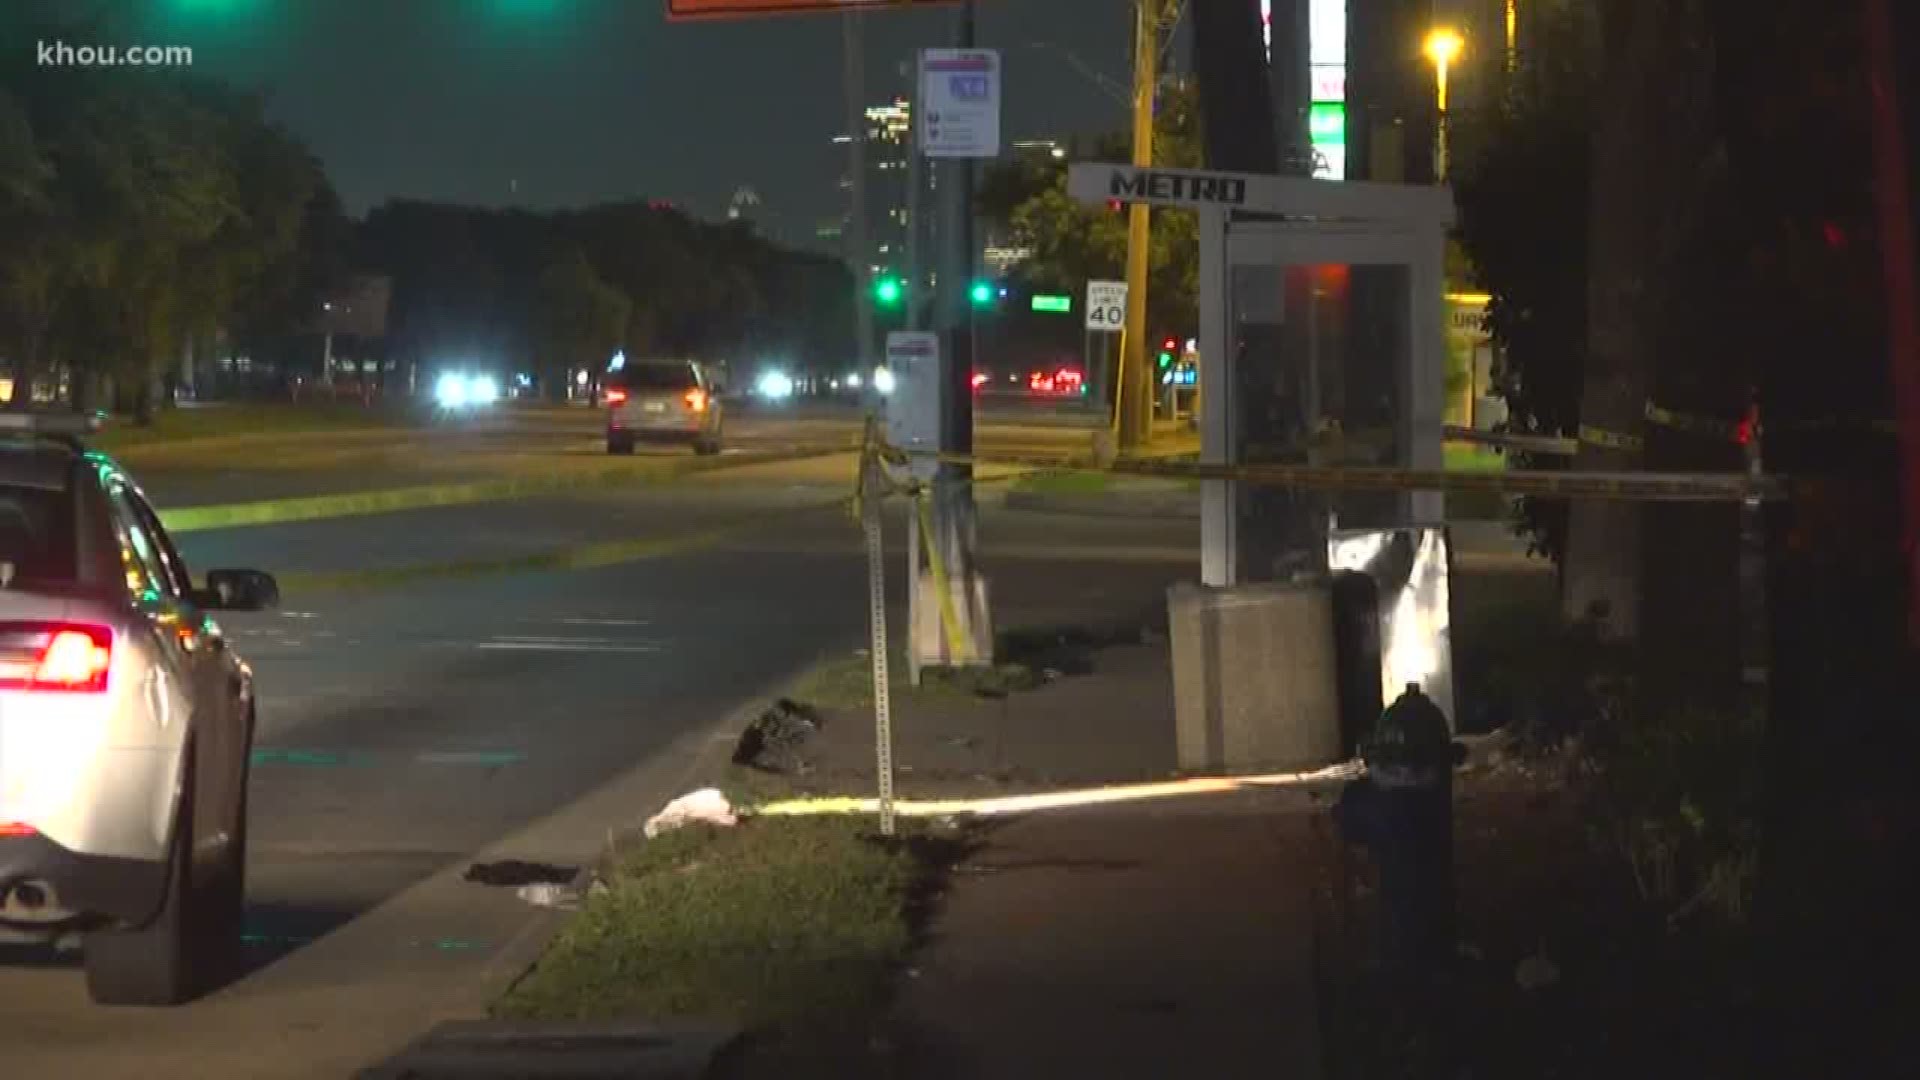 Police are searching for the person who stabbed a man as he waited for the bus in southwest Houston.